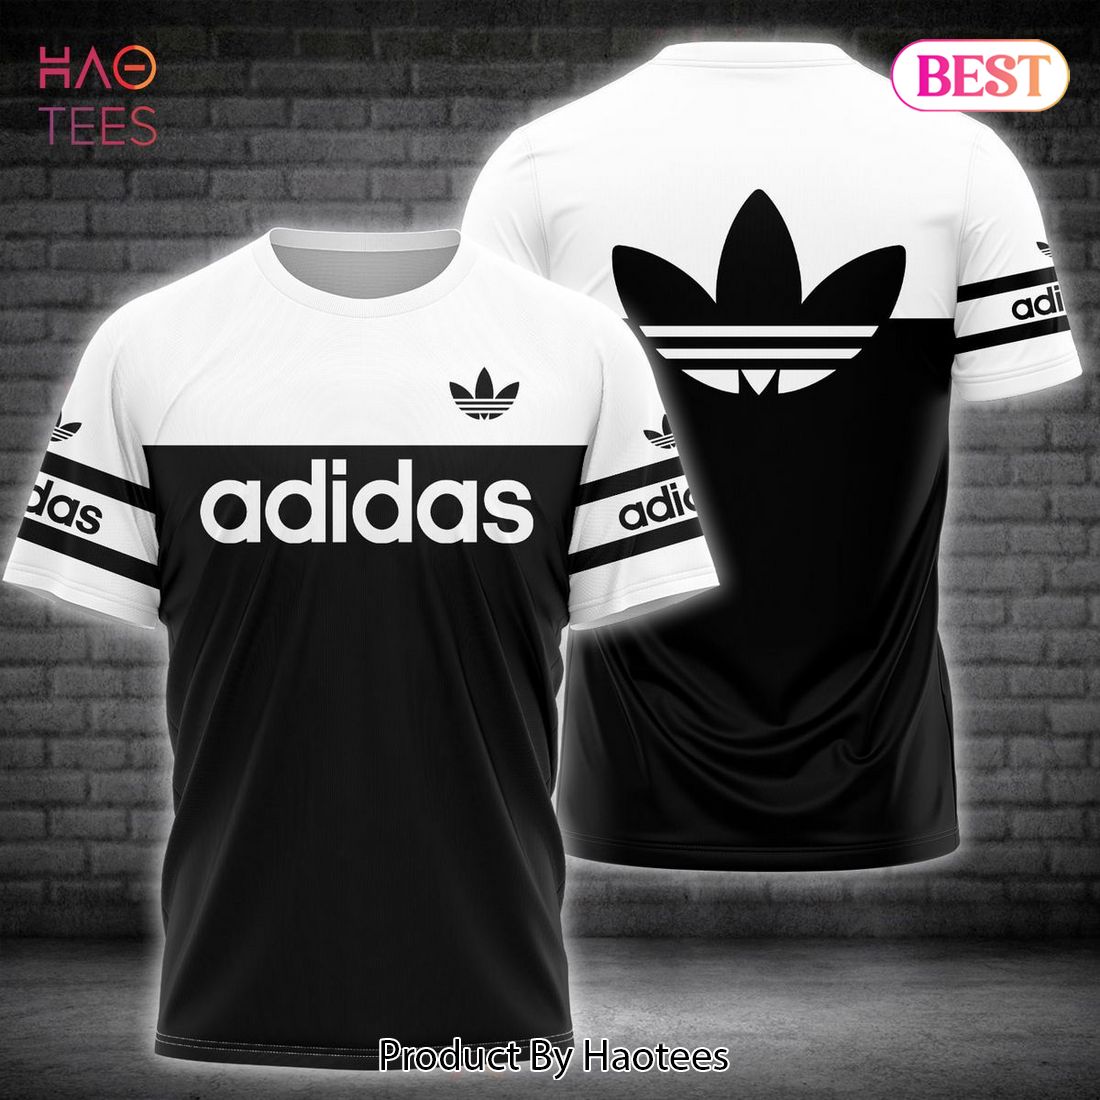 THE BEST Adidas 3D T-Shirt Attractive Style